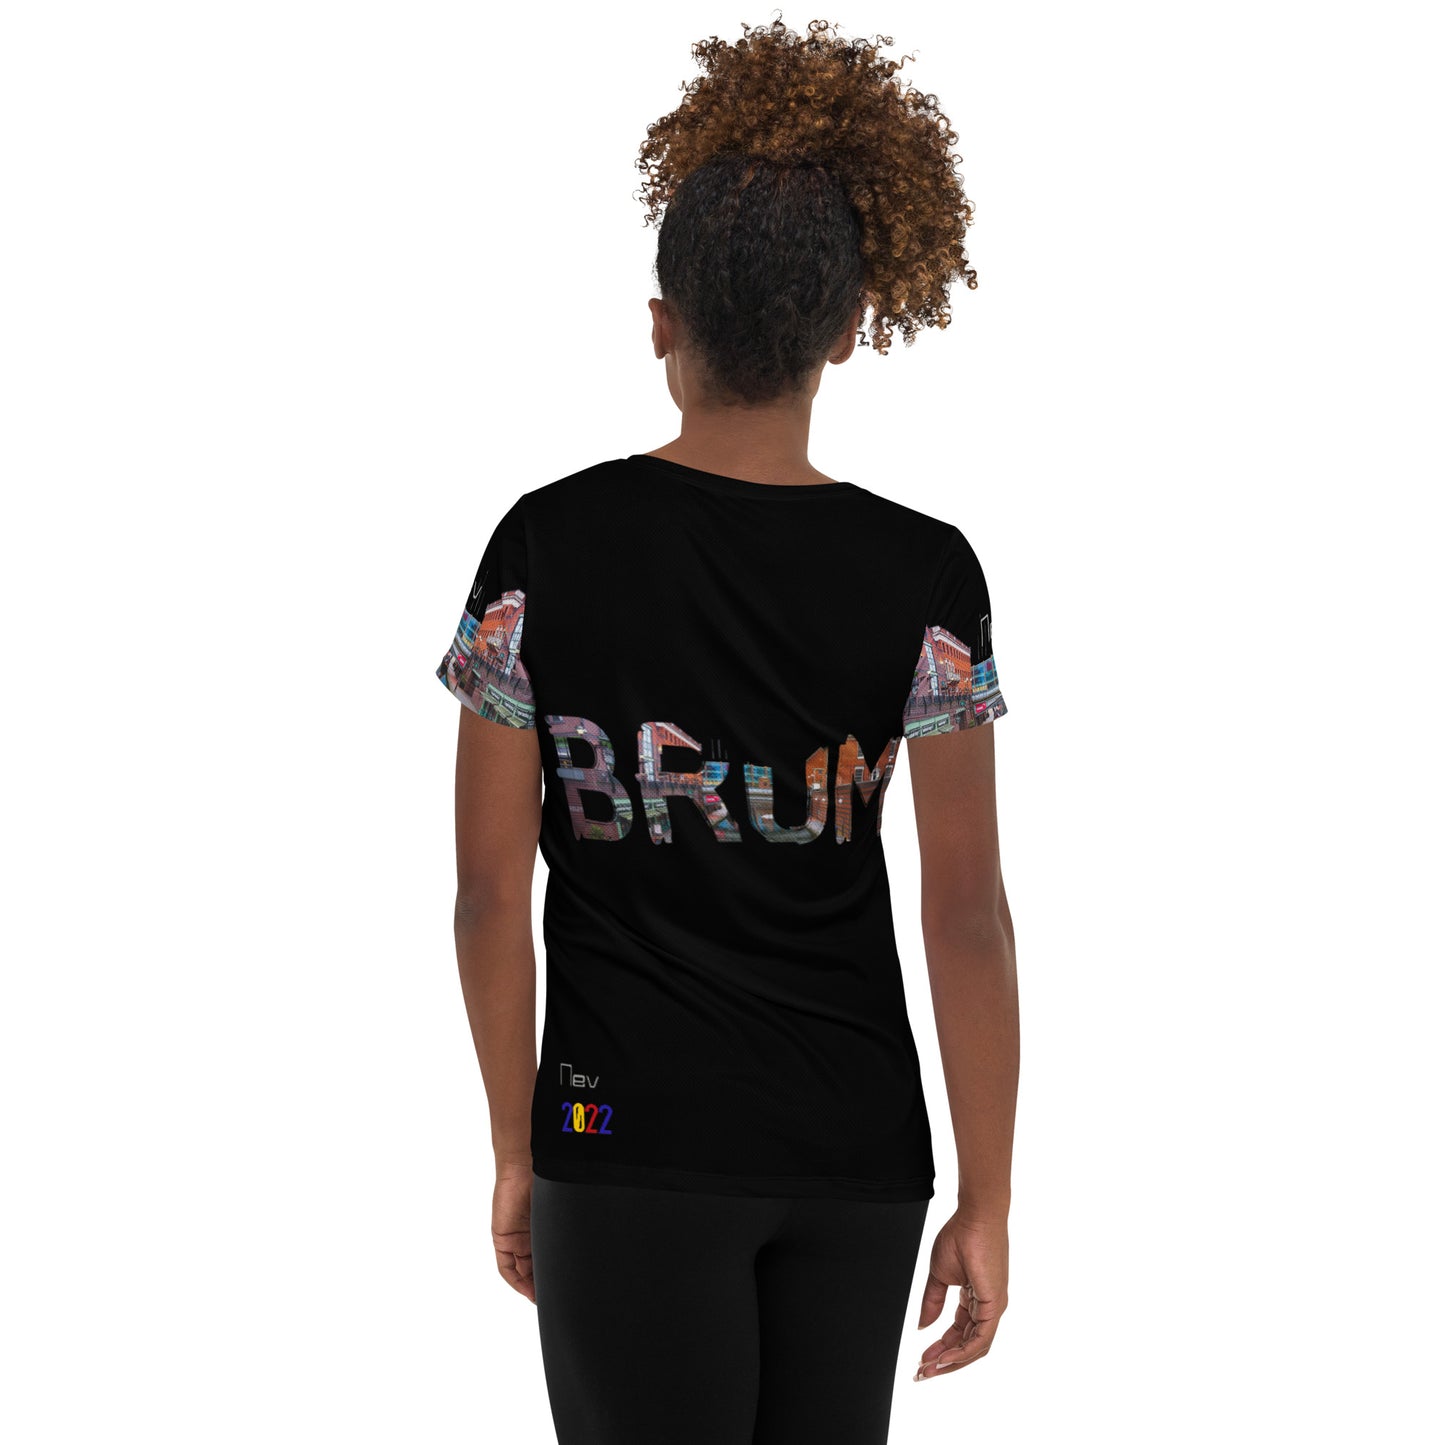 0121 It's A Brum T'ing All-Over Print Women's Athletic T-shirt